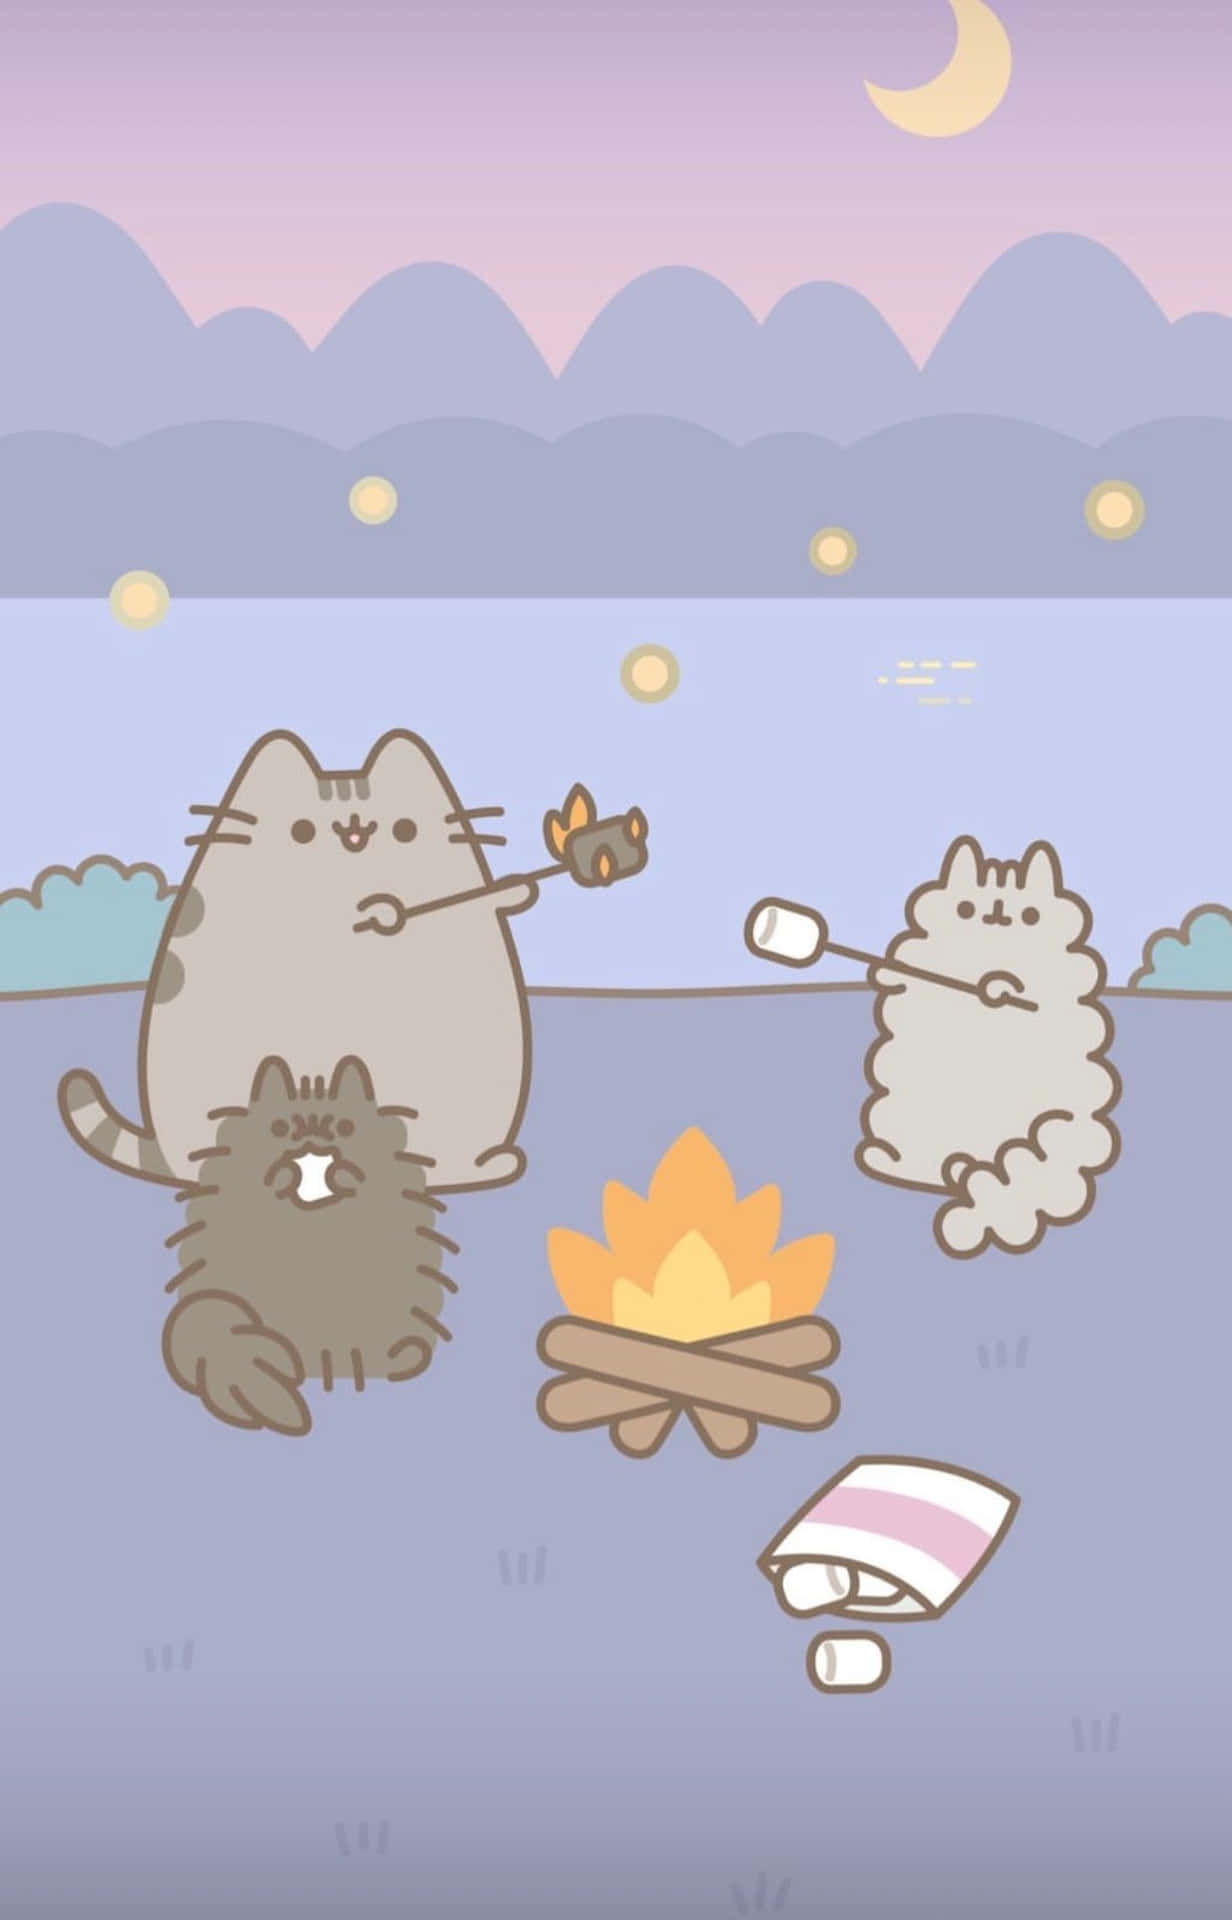 Pusheen the cat and friends roasting marshmallows - Pusheen, camping, marshmallows